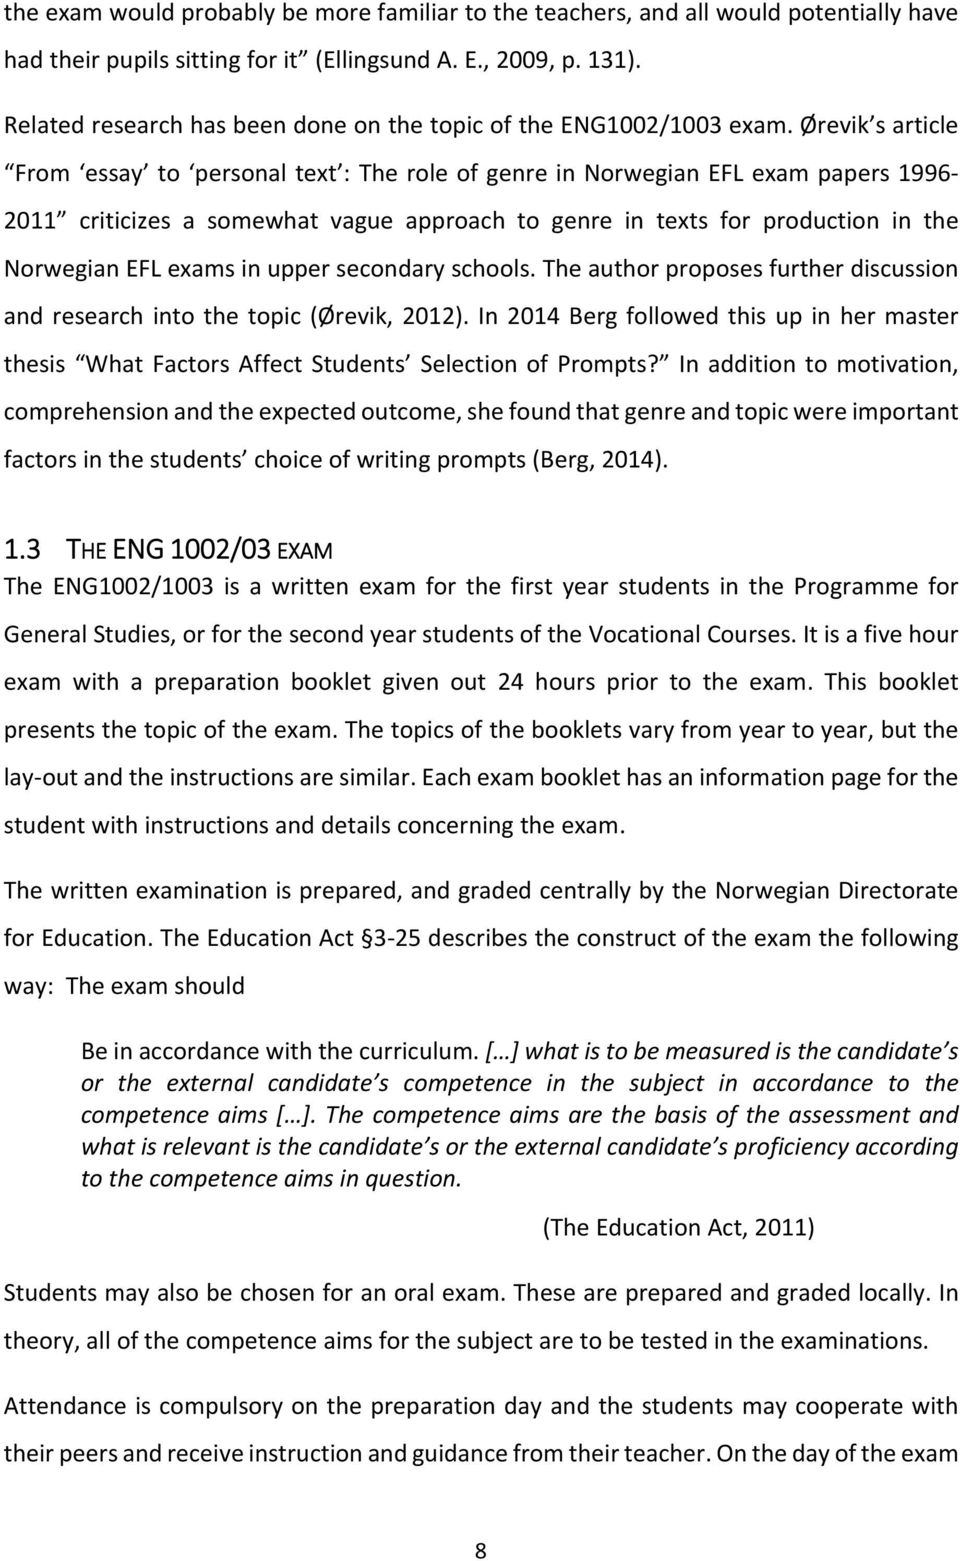 Ørevik s article From essay to personal text : The role of genre in Norwegian EFL exam papers 1996 2011 criticizes a somewhat vague approach to genre in texts for production in the Norwegian EFL